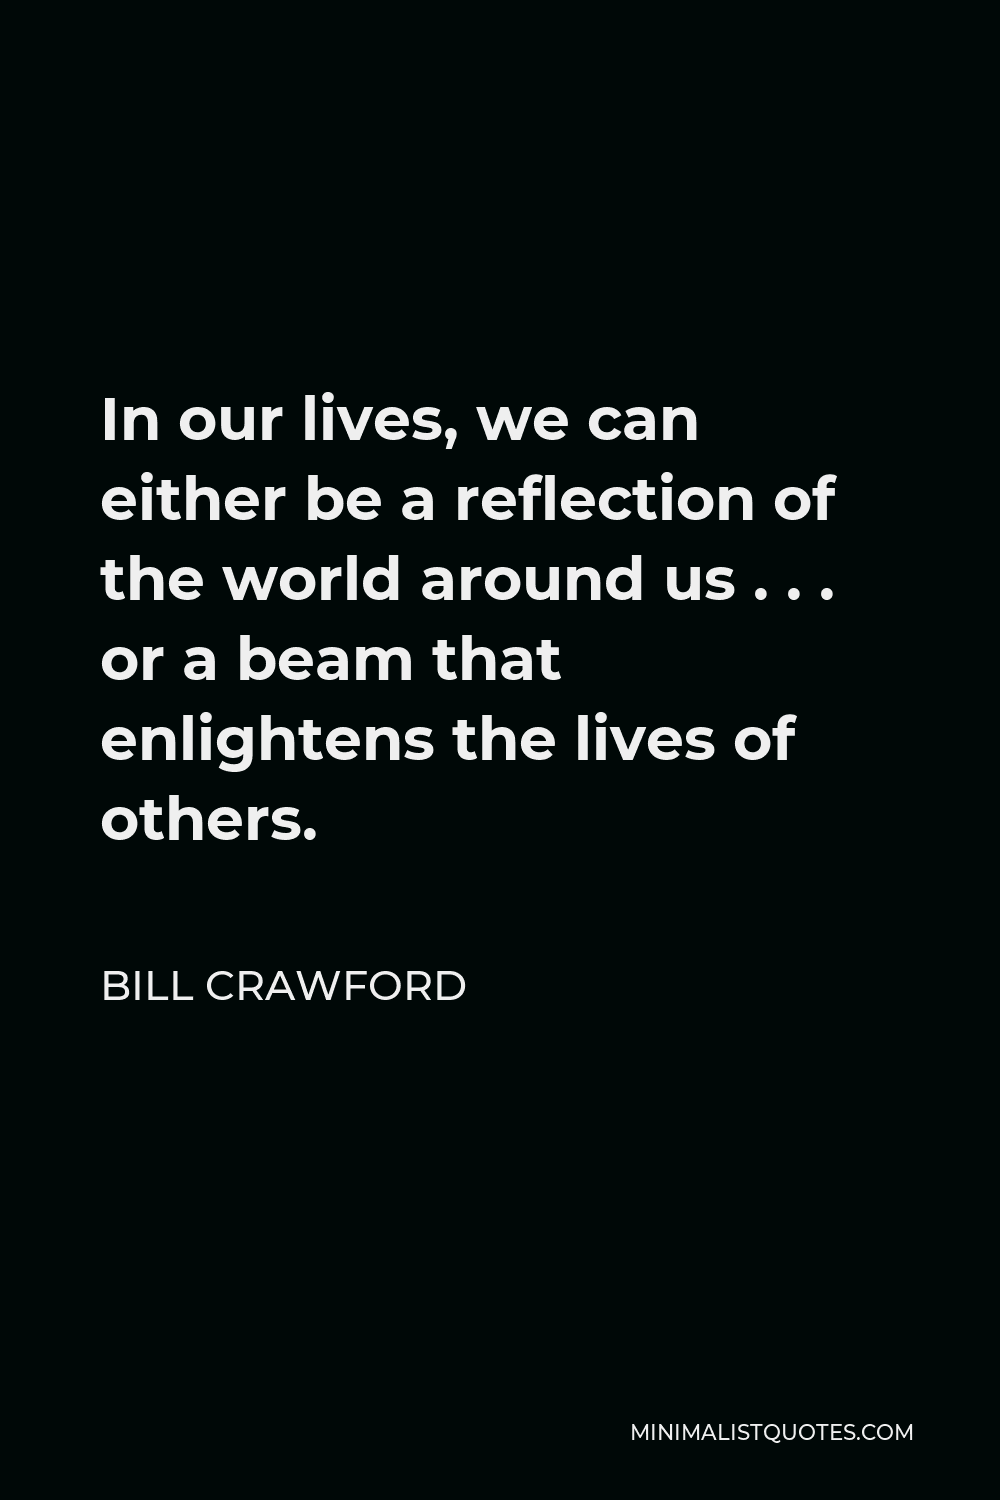 Bill Crawford Quote - In our lives, we can either be a reflection of the world around us . . . or a beam that enlightens the lives of others.